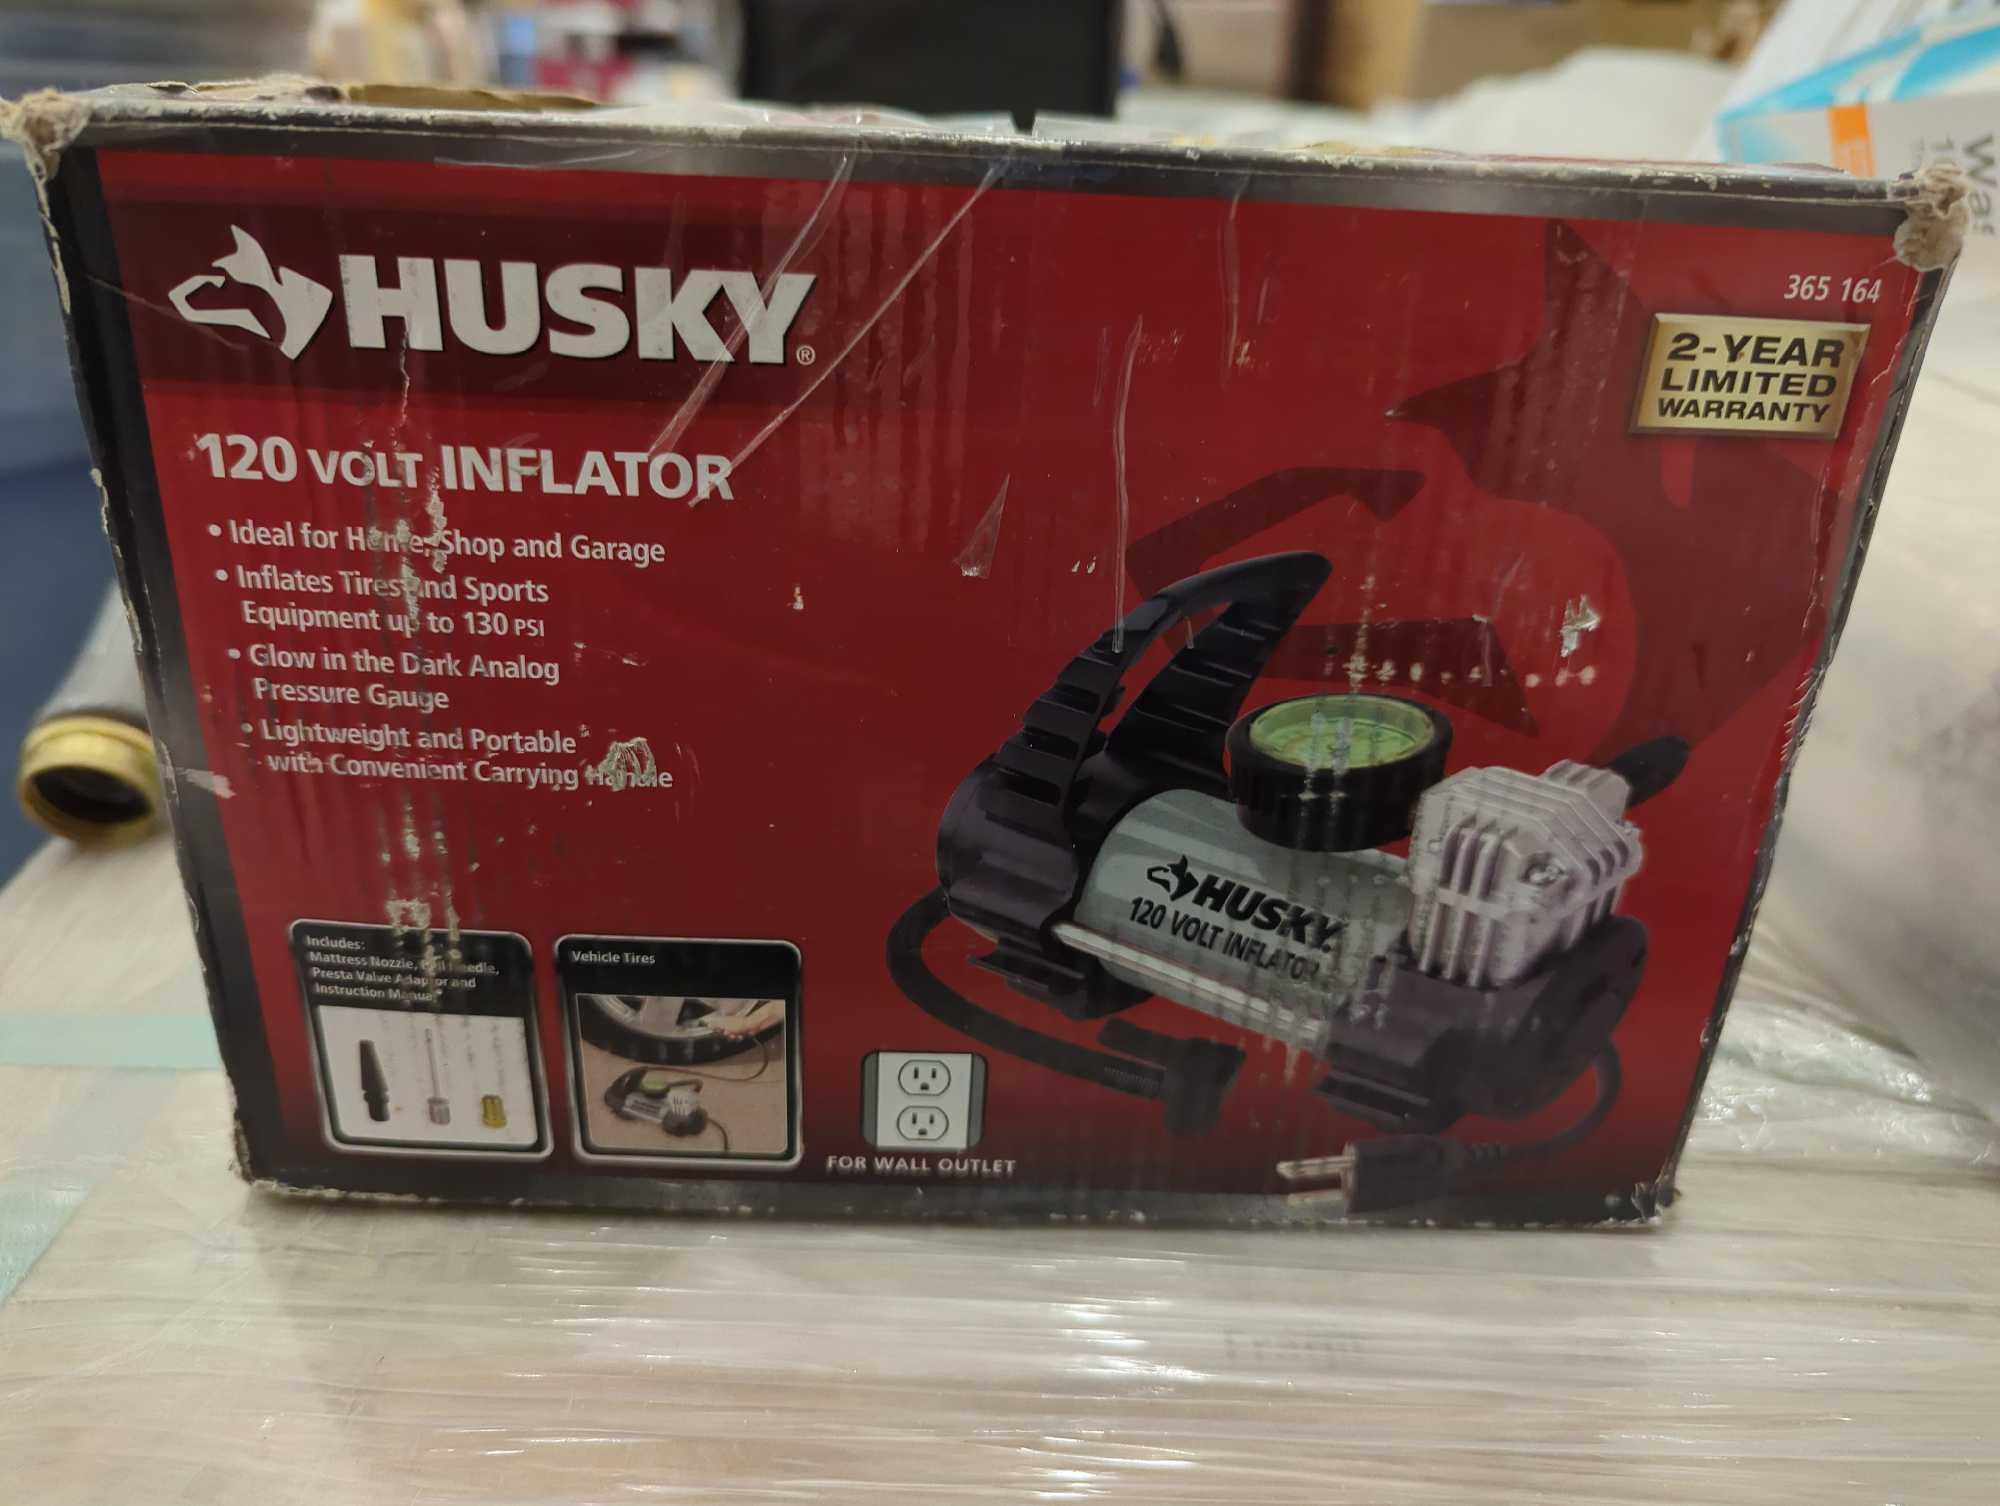 Husky 120-Volt Corded Electric Inflator, Appears to be Used in Open Box Retail Price Value $40